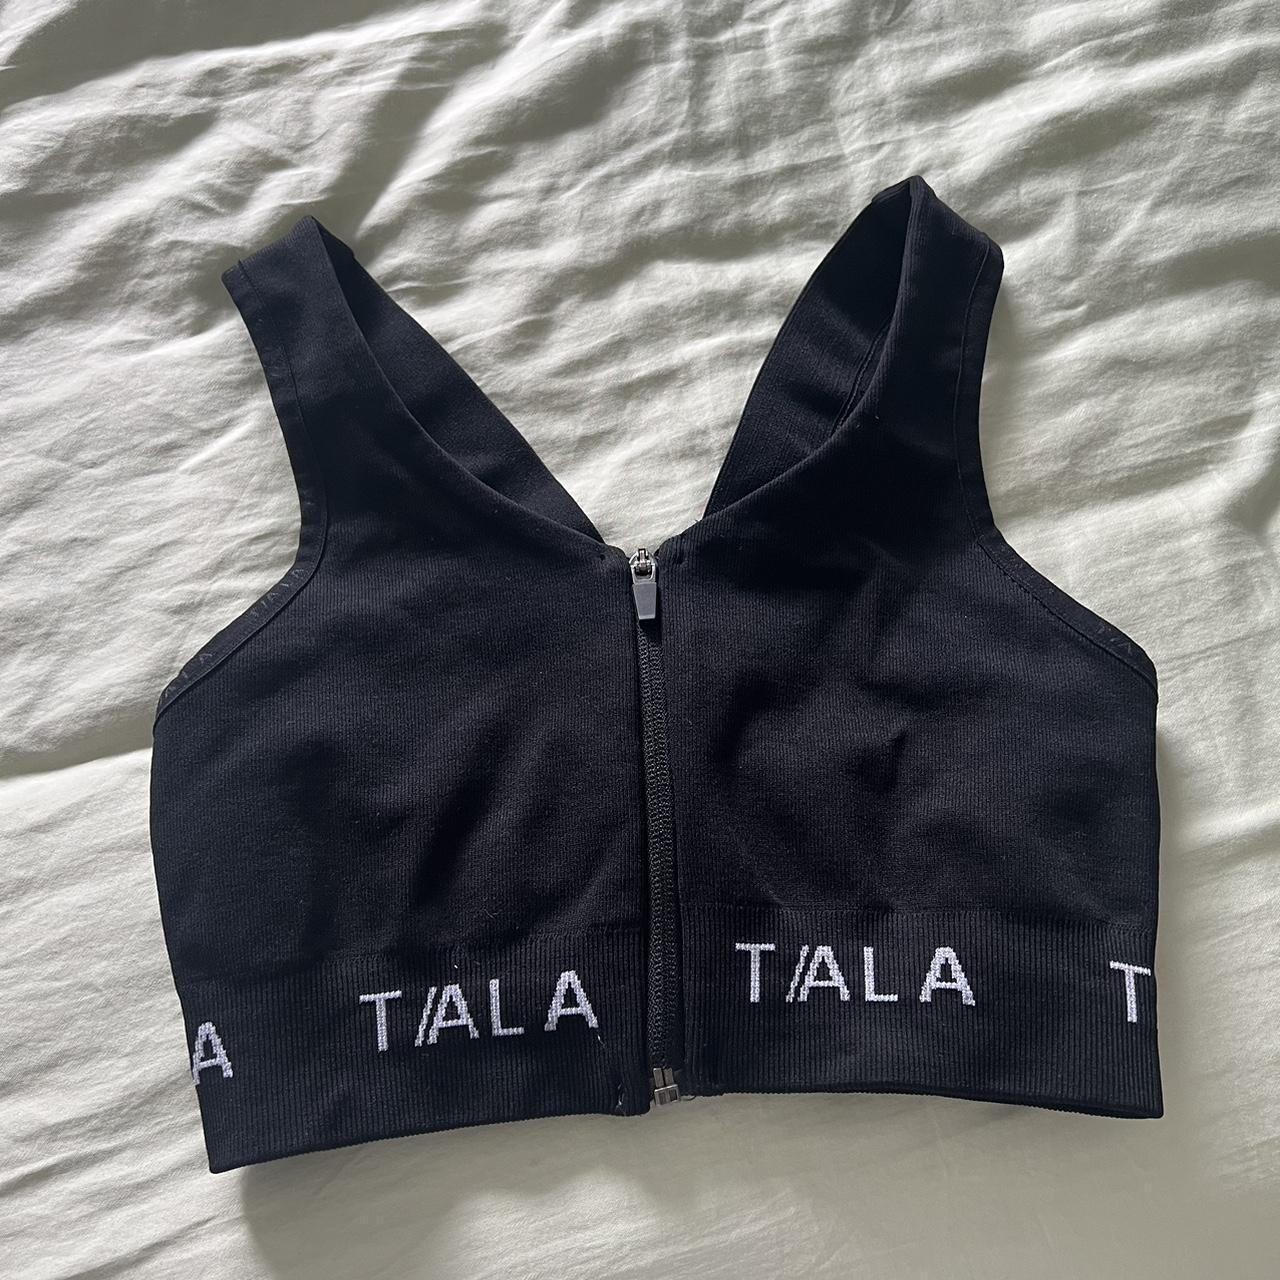 TALA hot pink zip sports bra. Bought from ASOS (now - Depop